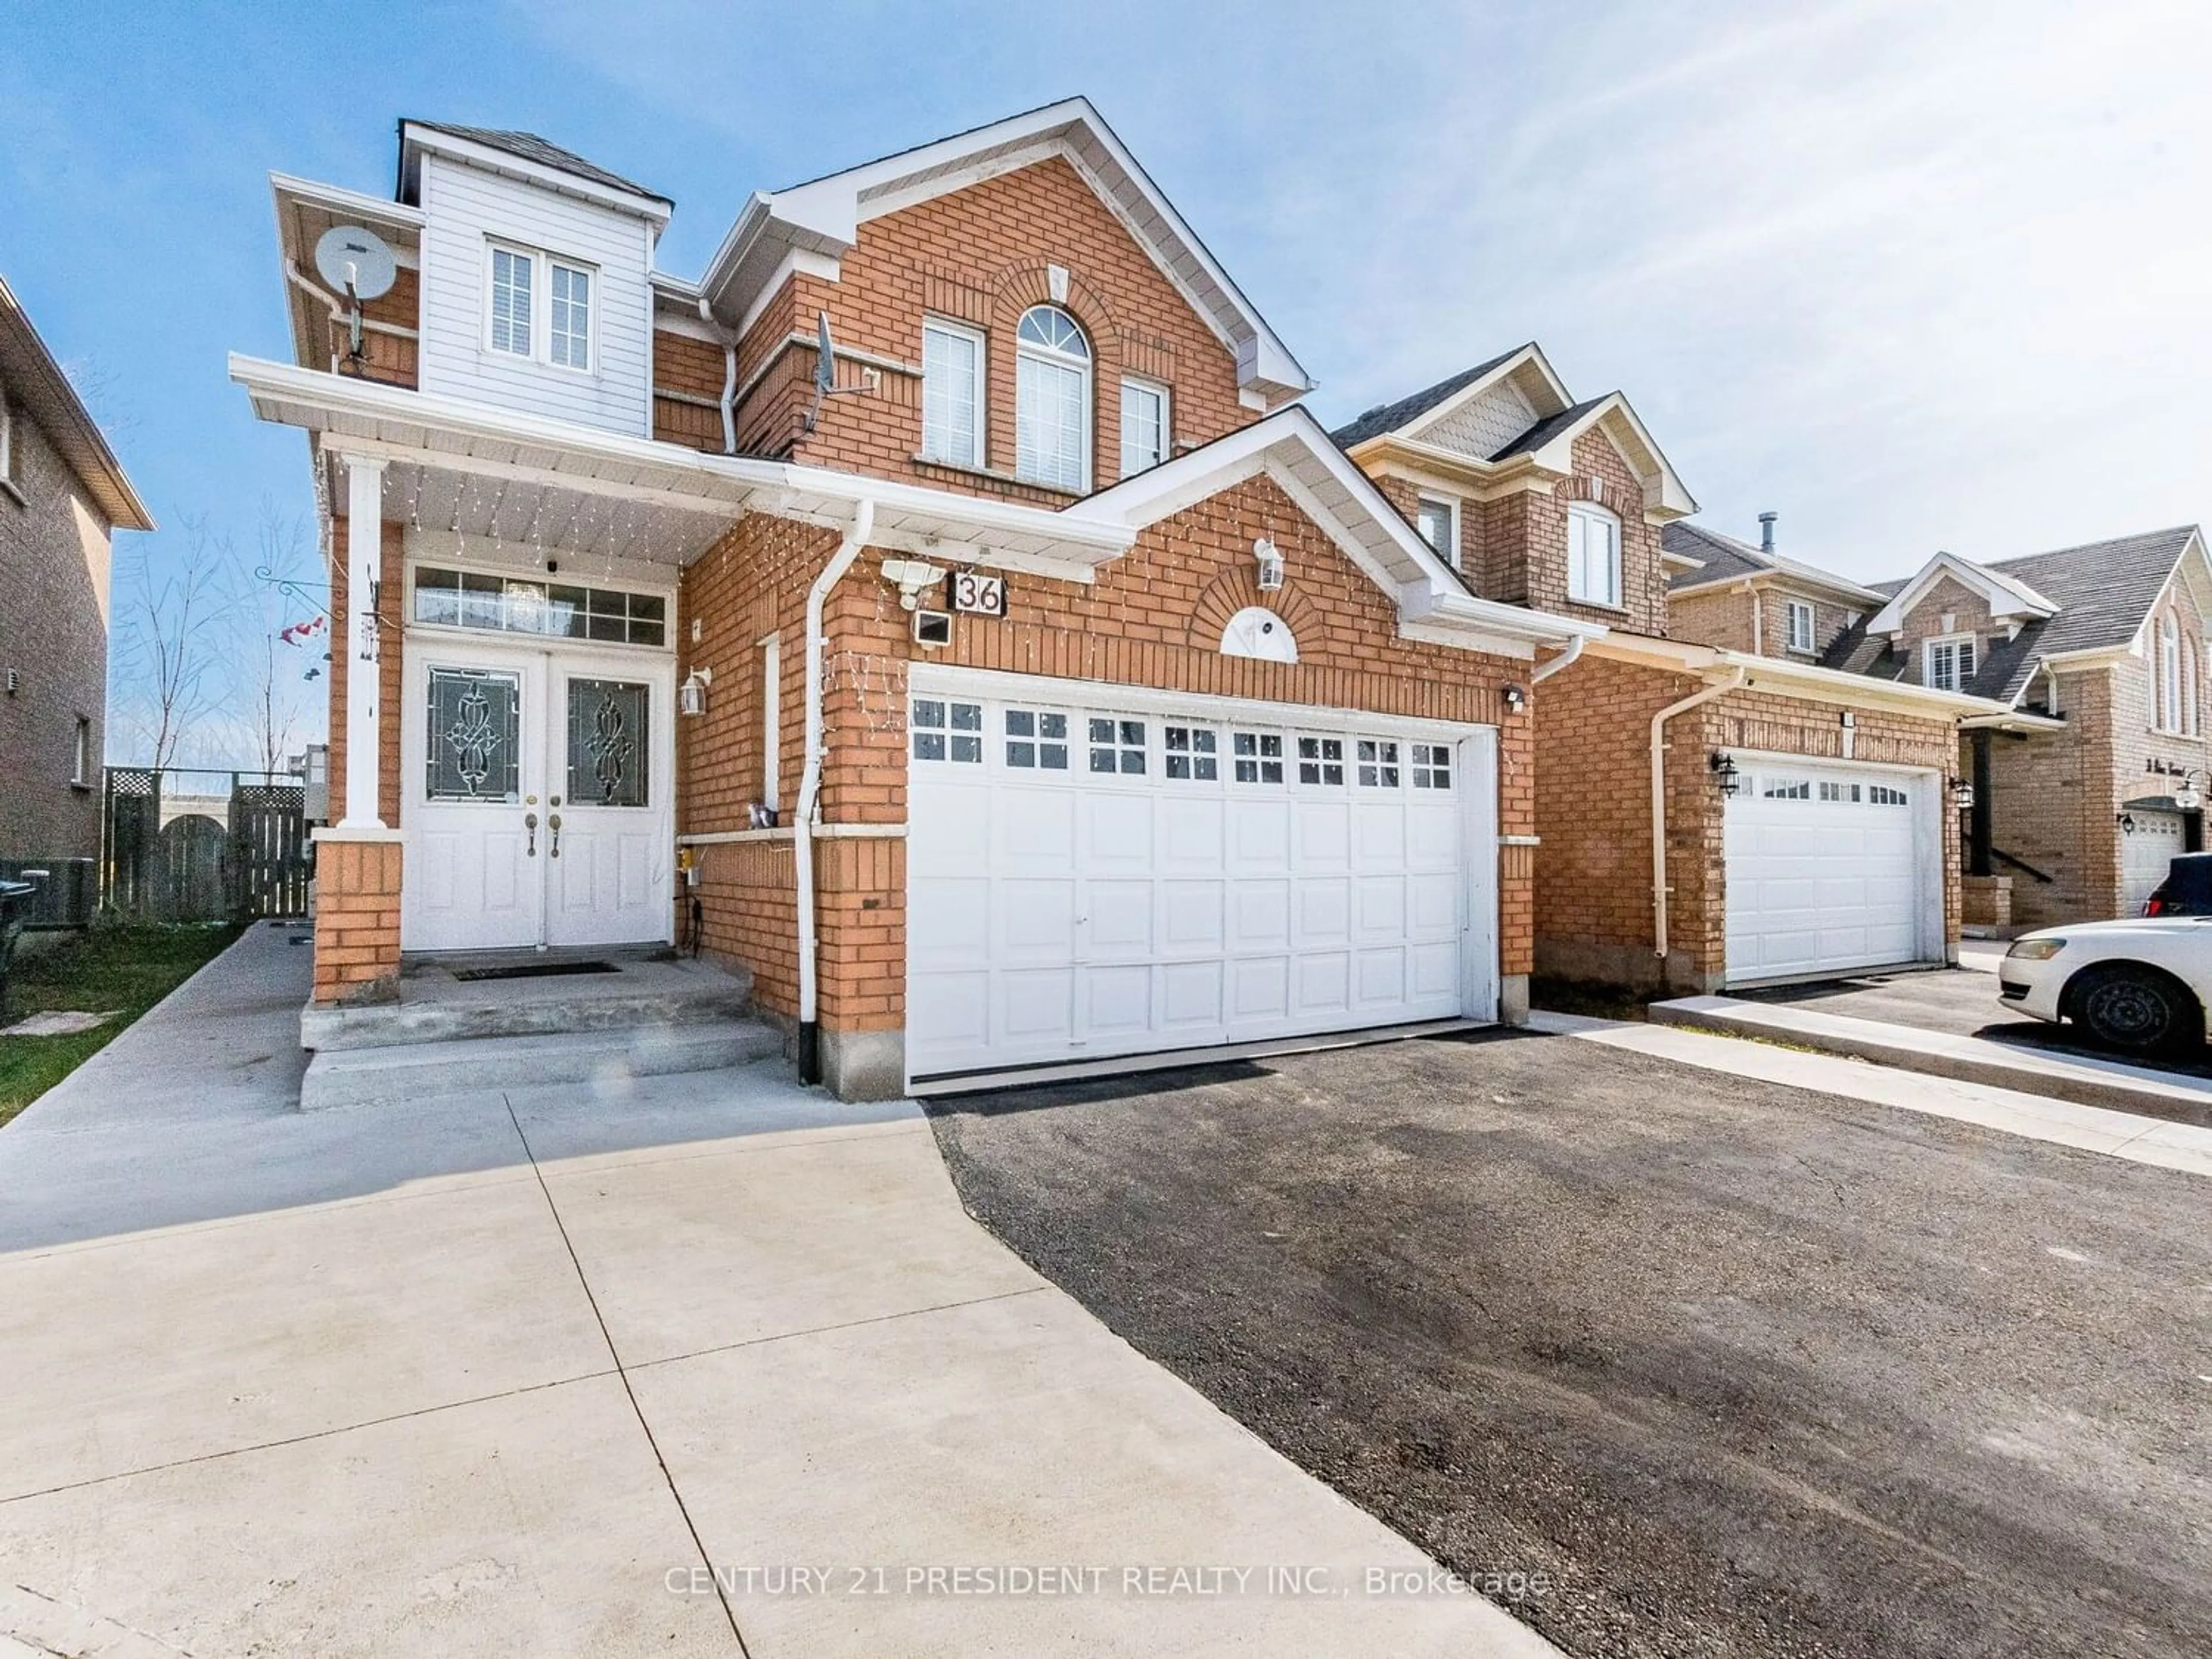 Home with brick exterior material for 36 Prince Cres, Brampton Ontario L7A 2C9